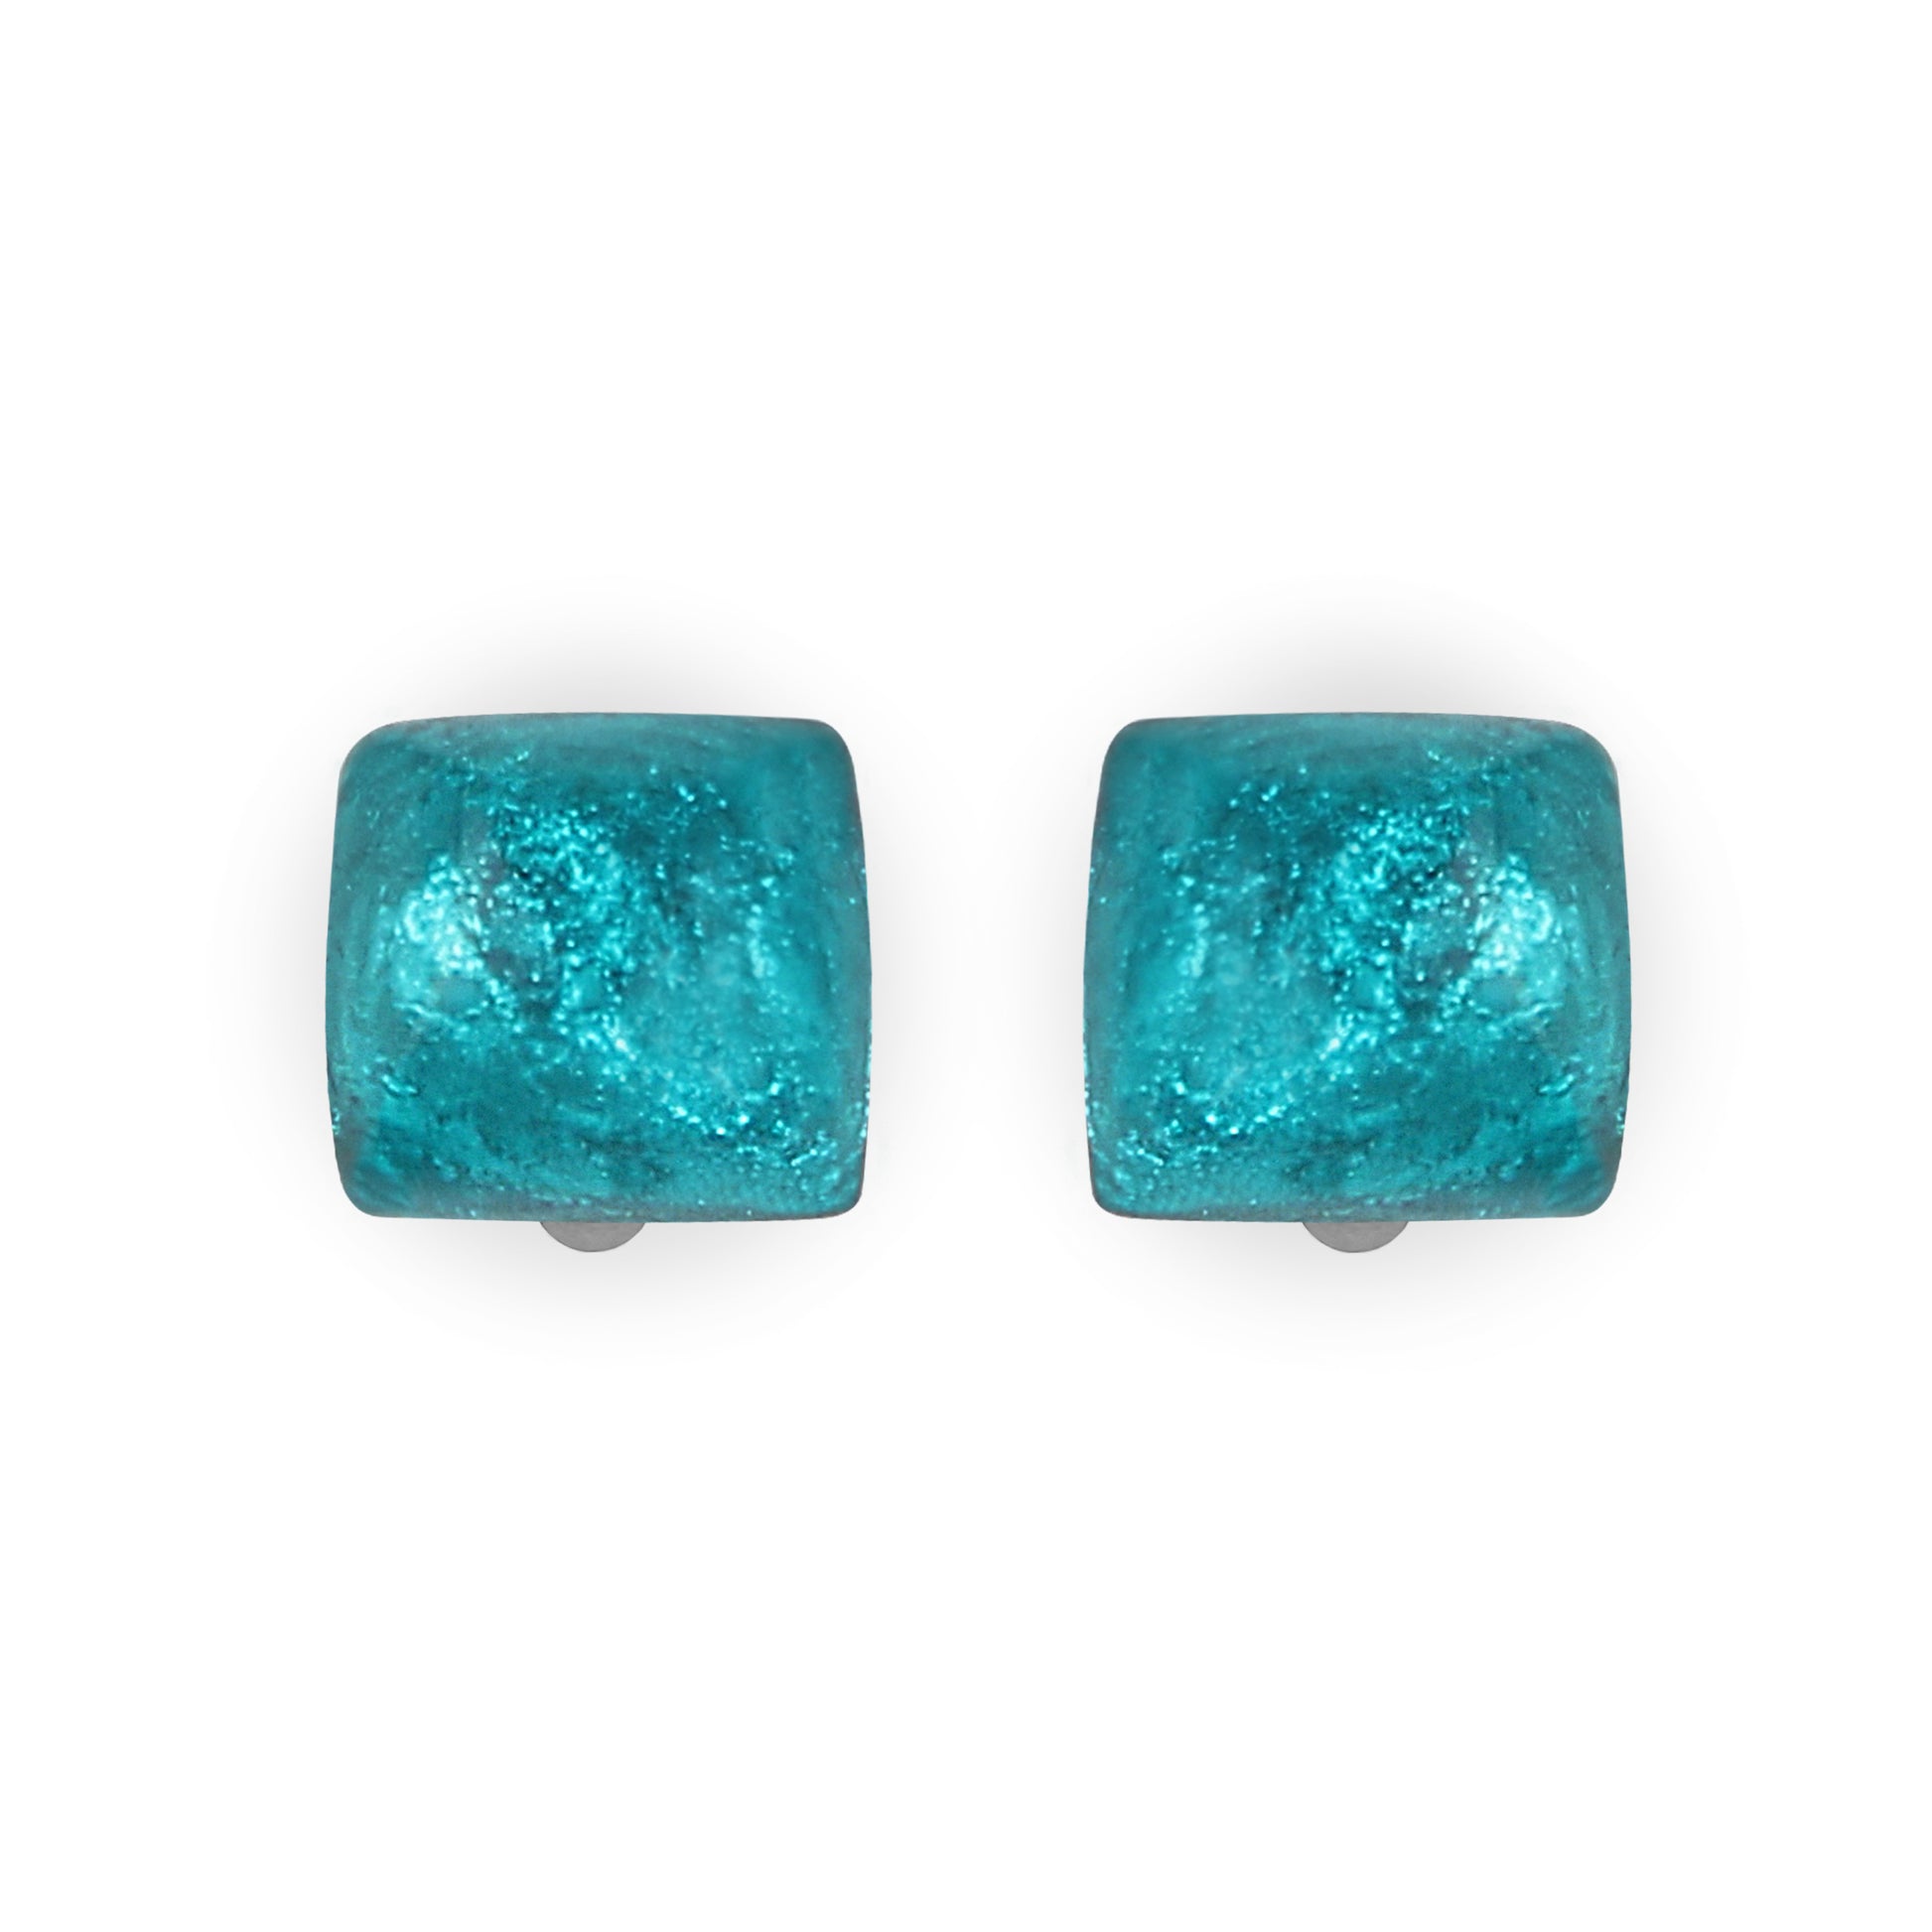 Peacock Cabouchon Squares Shiny Clip Earrings